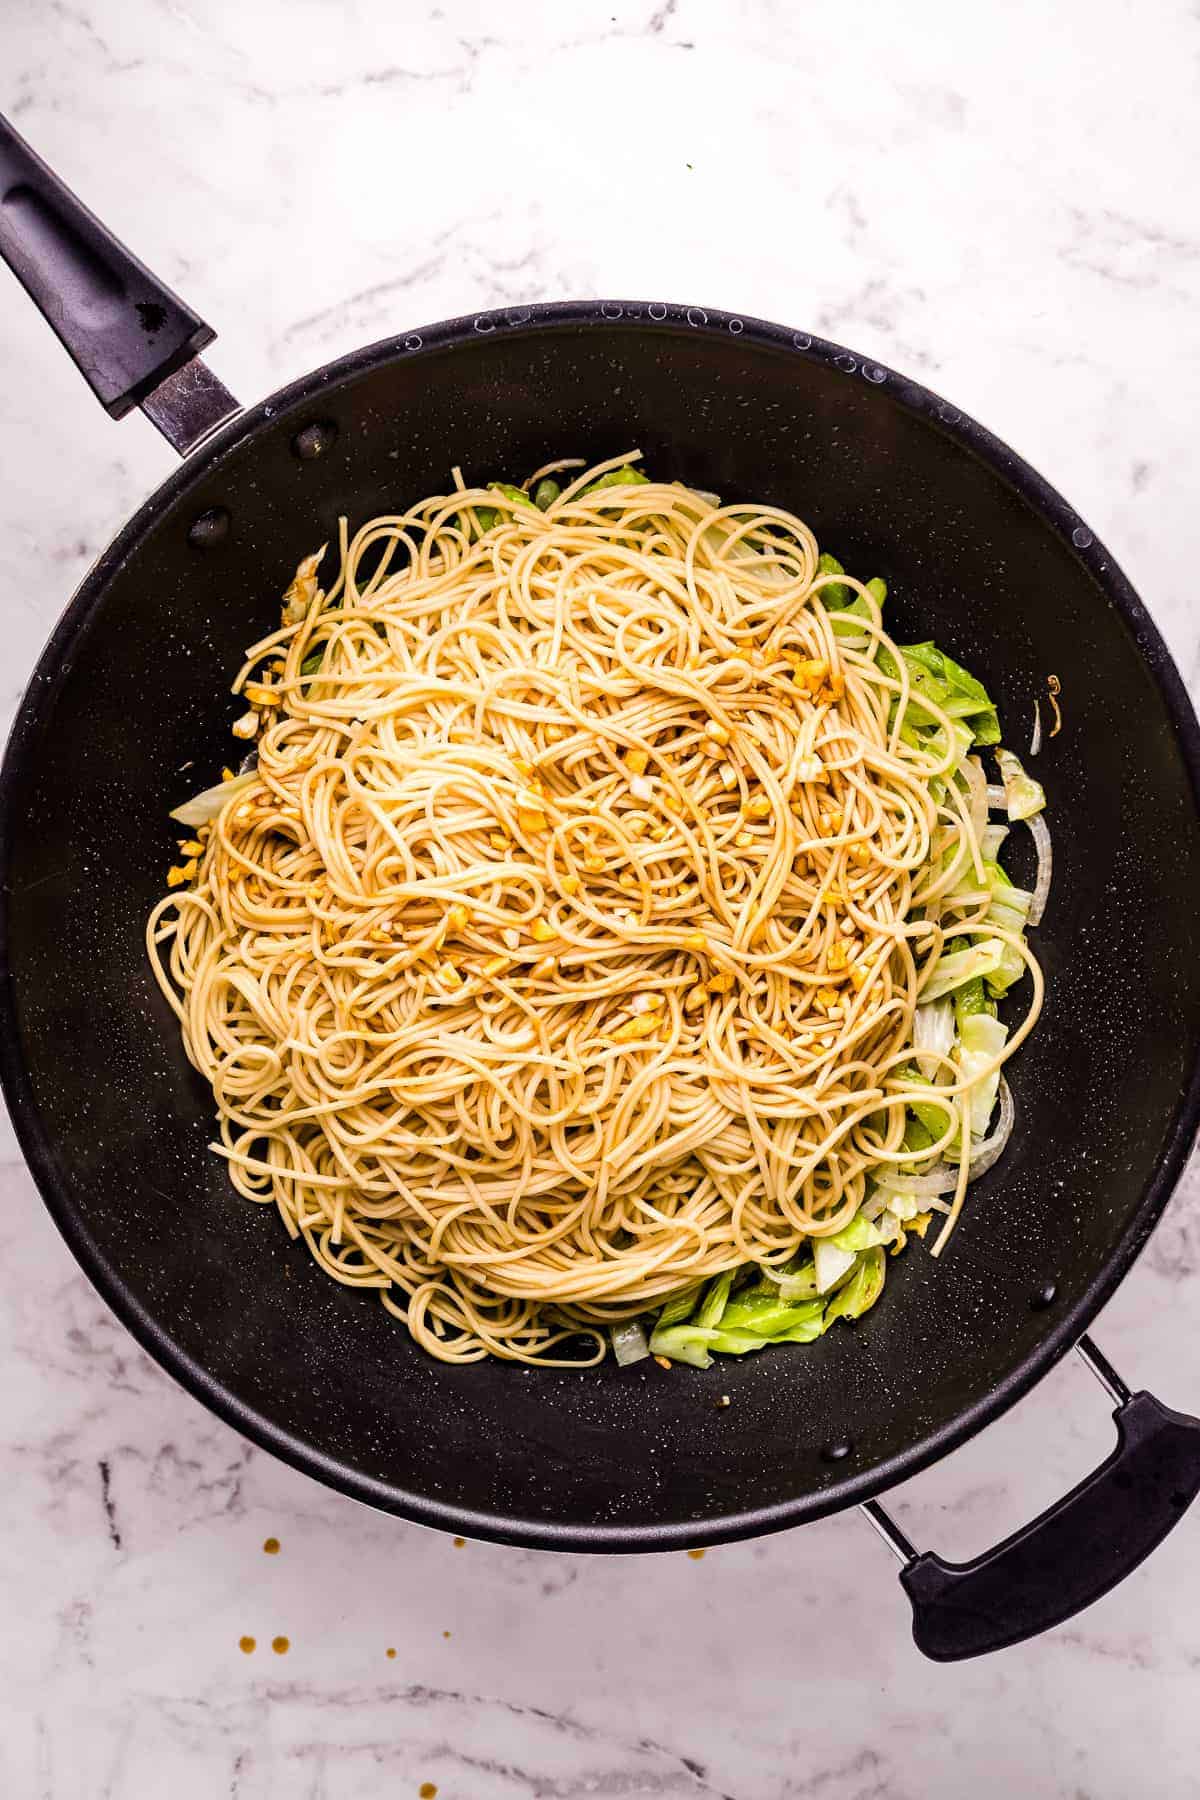 Skillet with noodles to prepare chow mein